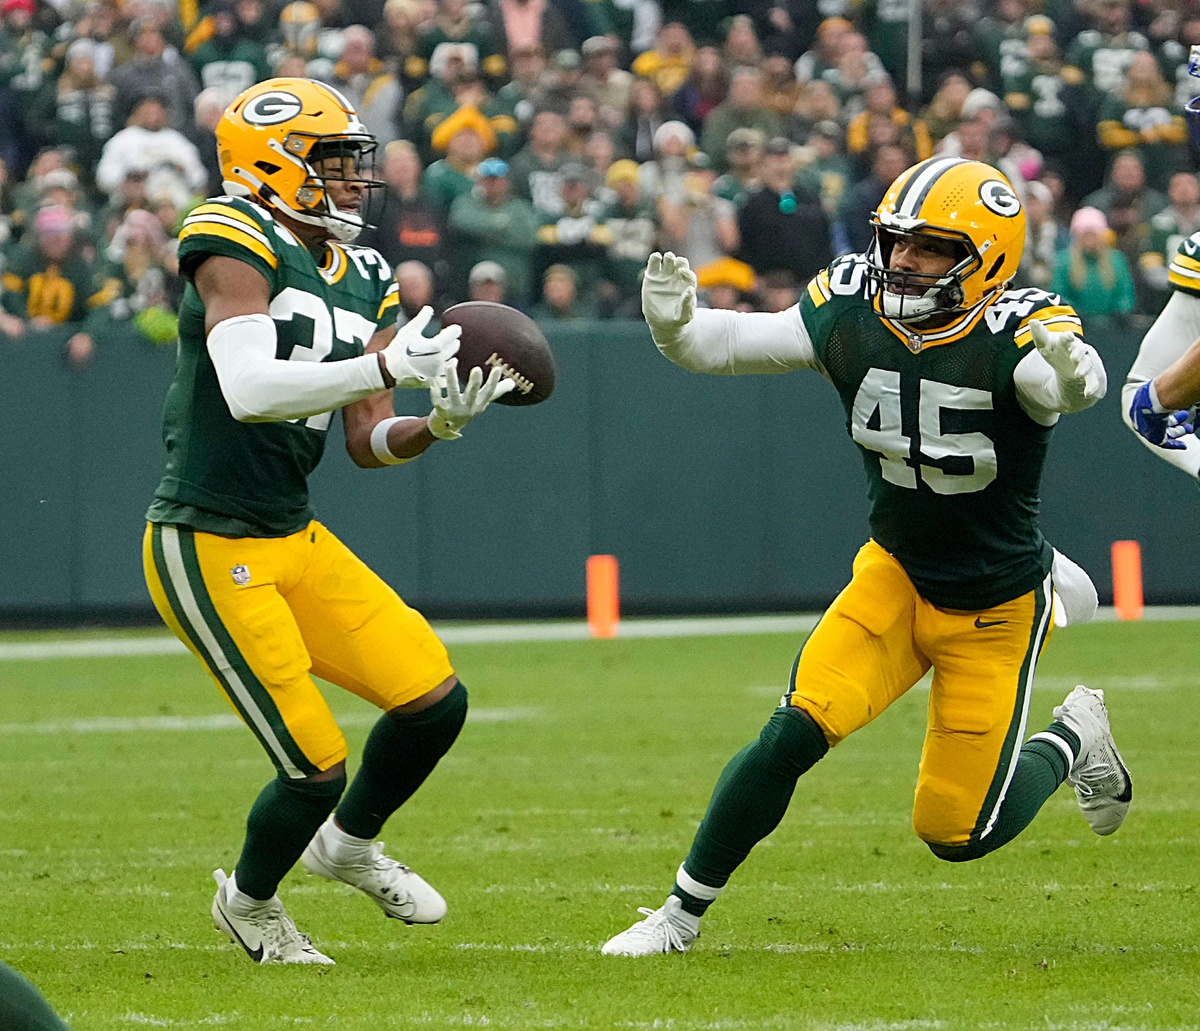 Green Bay Packers cornerback Carrington Valentine (37) nearly intercepts a pass during the second half of their game against the Los Angeles Rams on Sunday, Nov. 5, 2023 at Lambeau Field in Green Bay. © Mike De Sisti / The Milwaukee Journal Sentinel / USA TODAY NETWORK